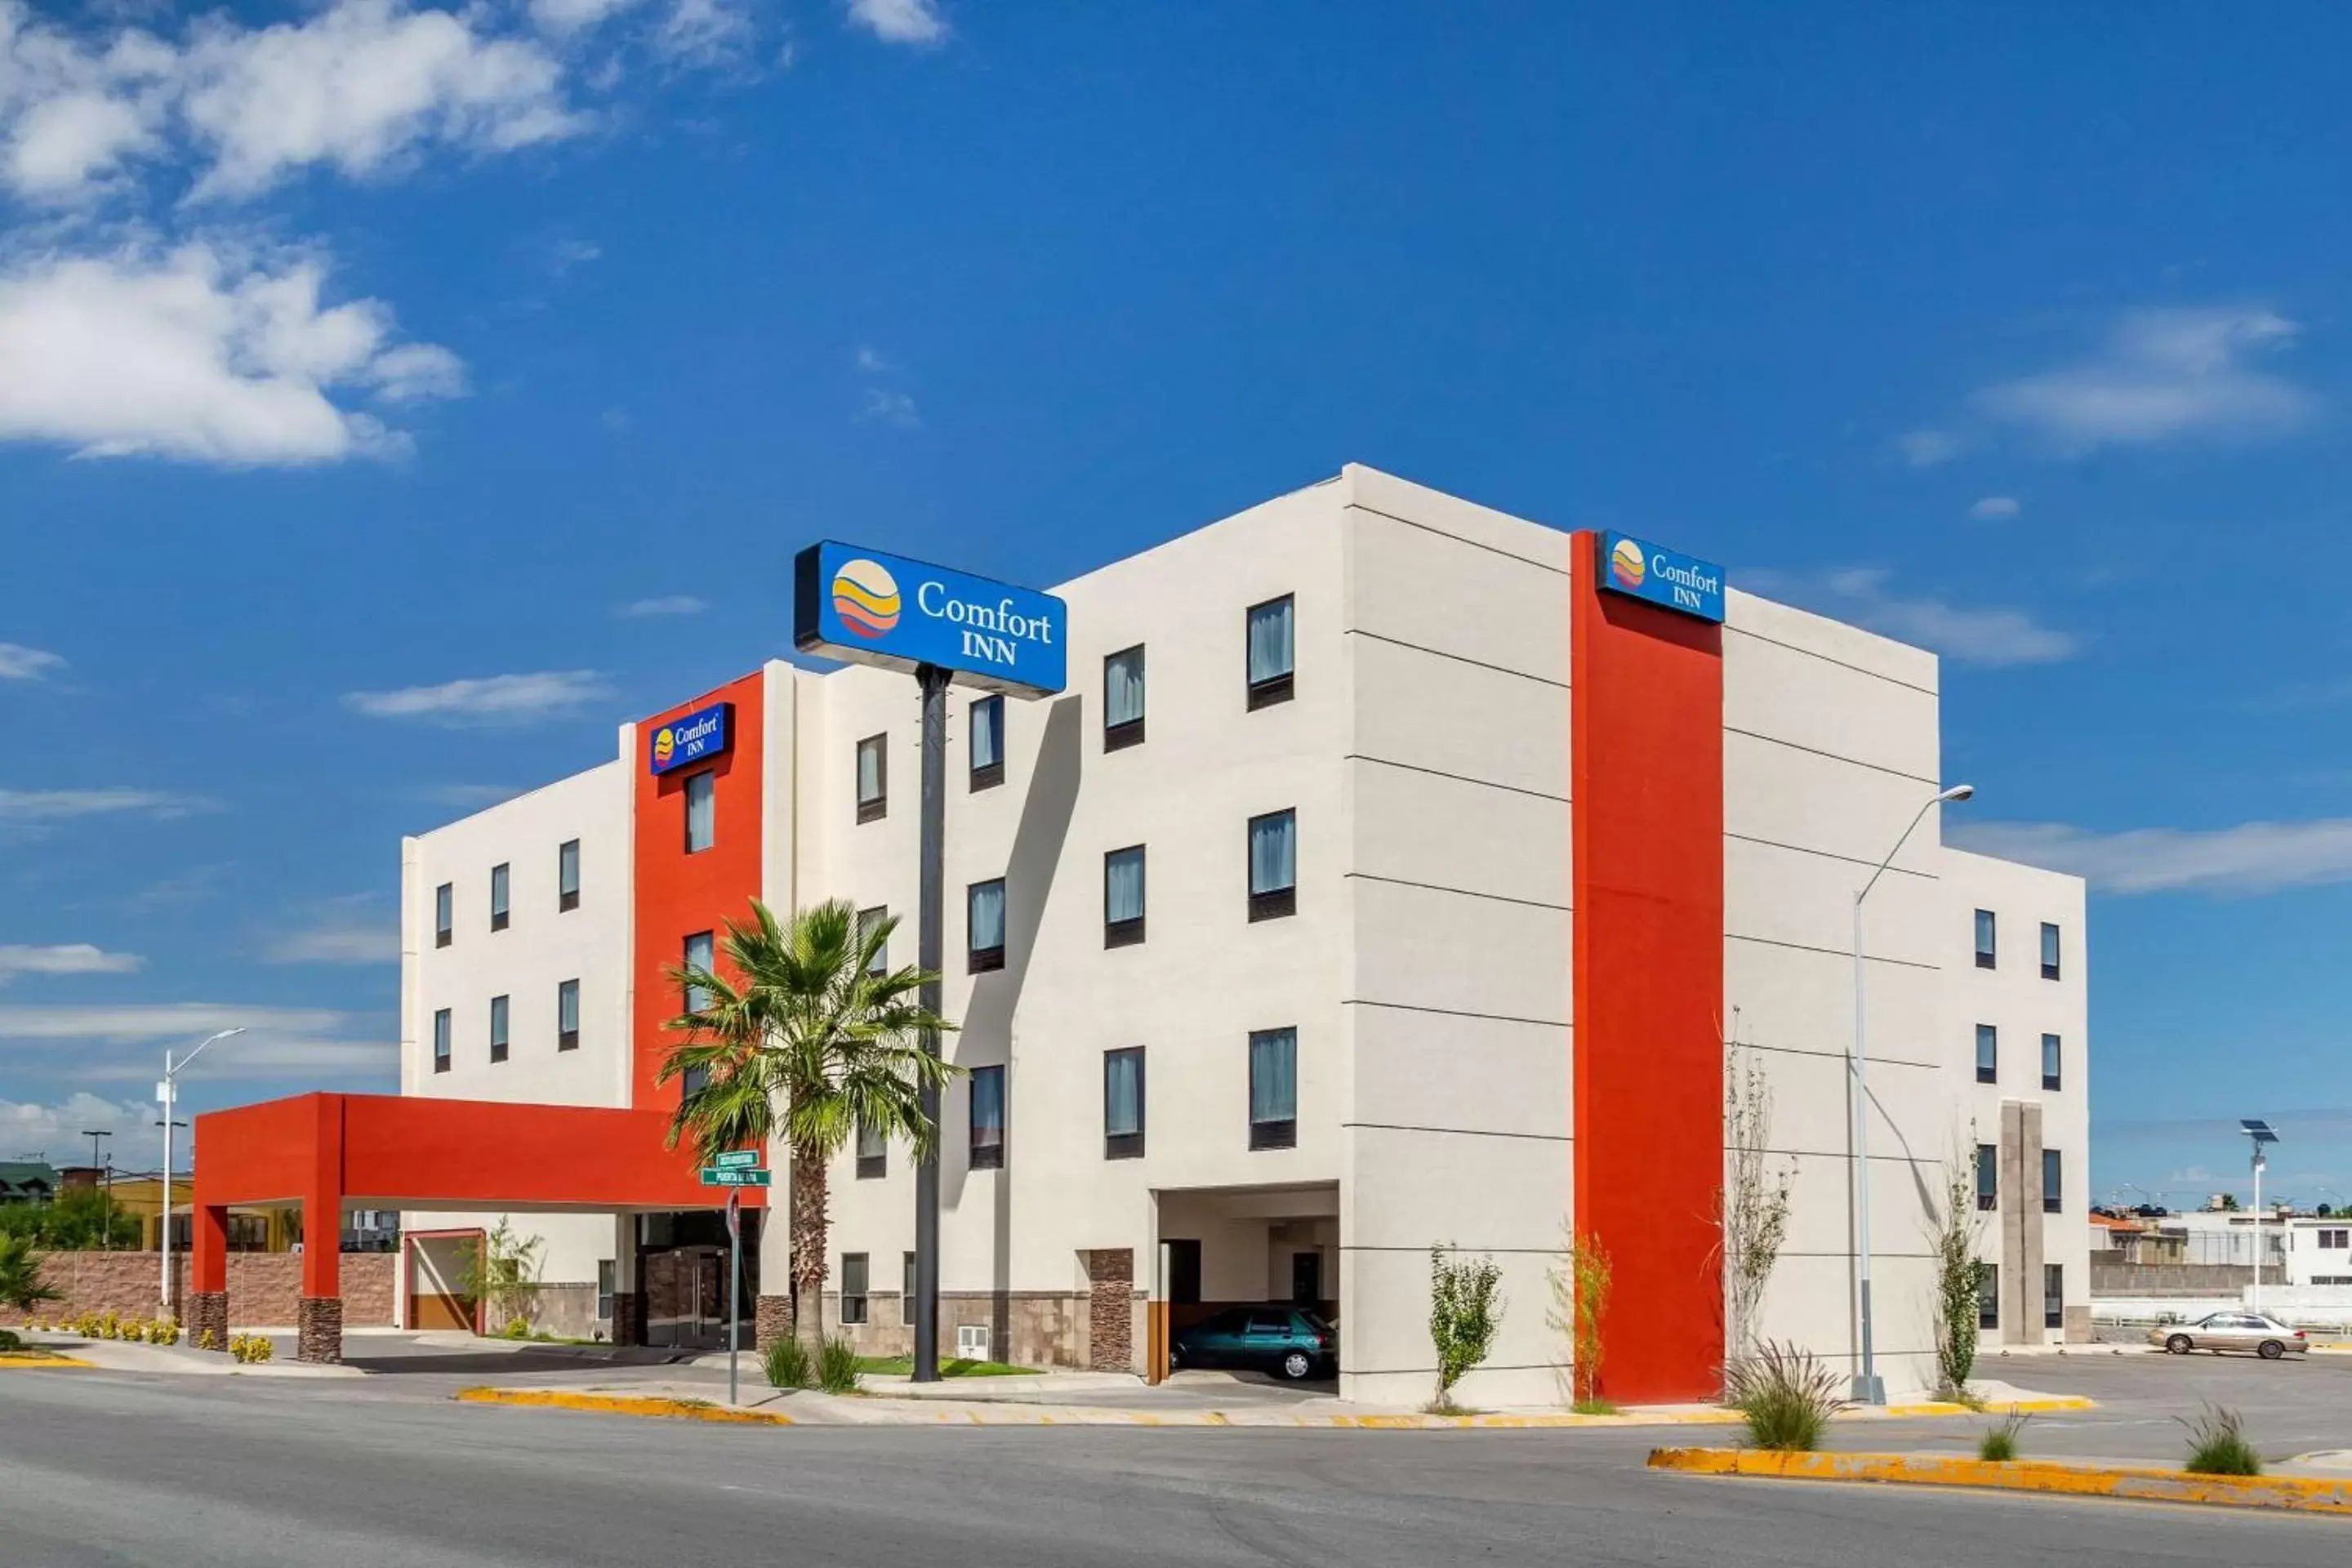 Property Building in Comfort Inn Chihuahua